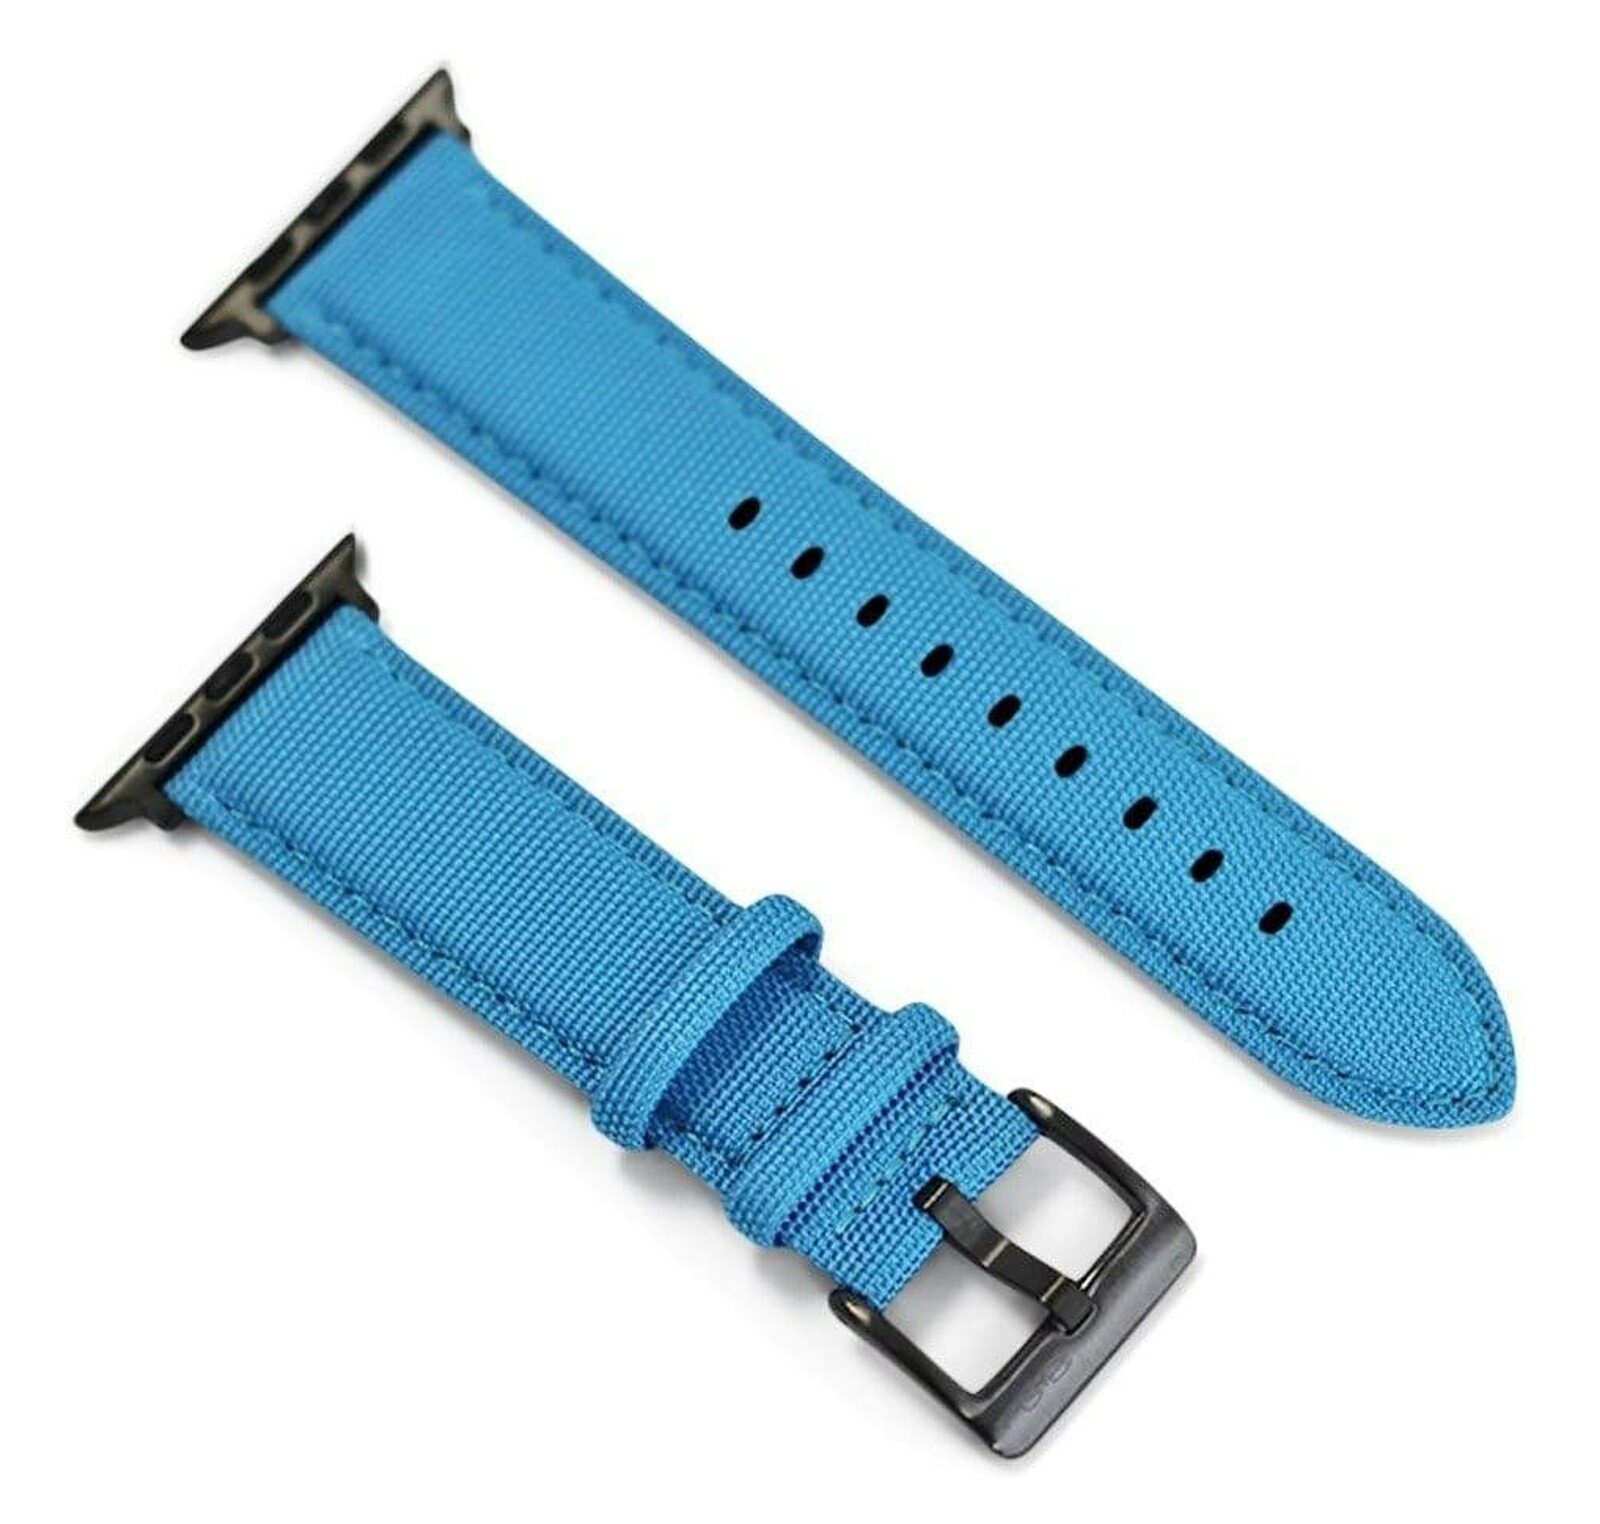 BluShark's Cordura Apple Watch band is made from an ultra-strong fabric.